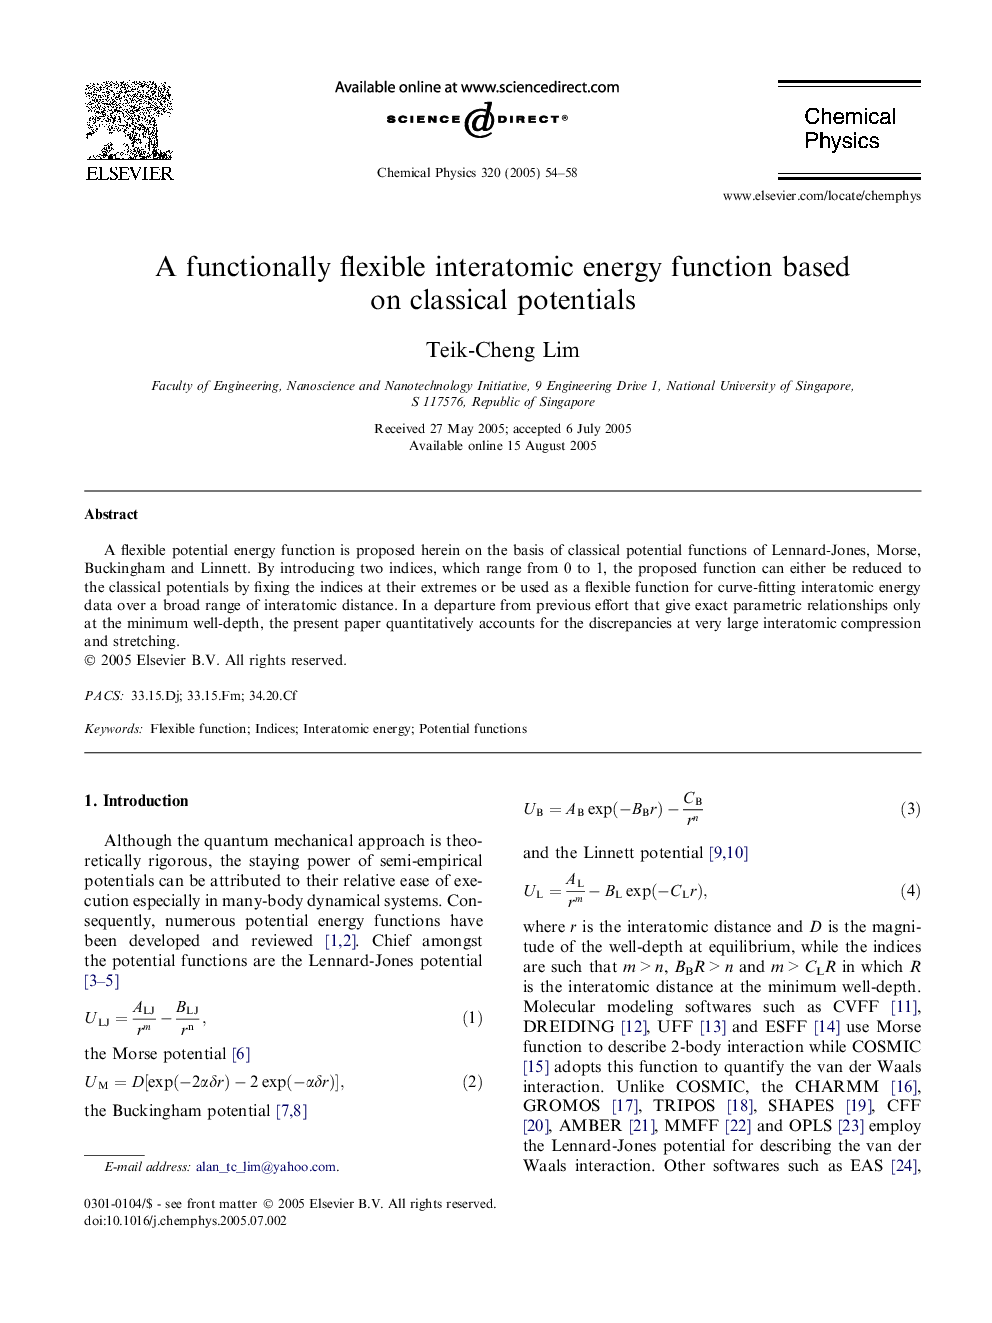 A functionally flexible interatomic energy function based on classical potentials